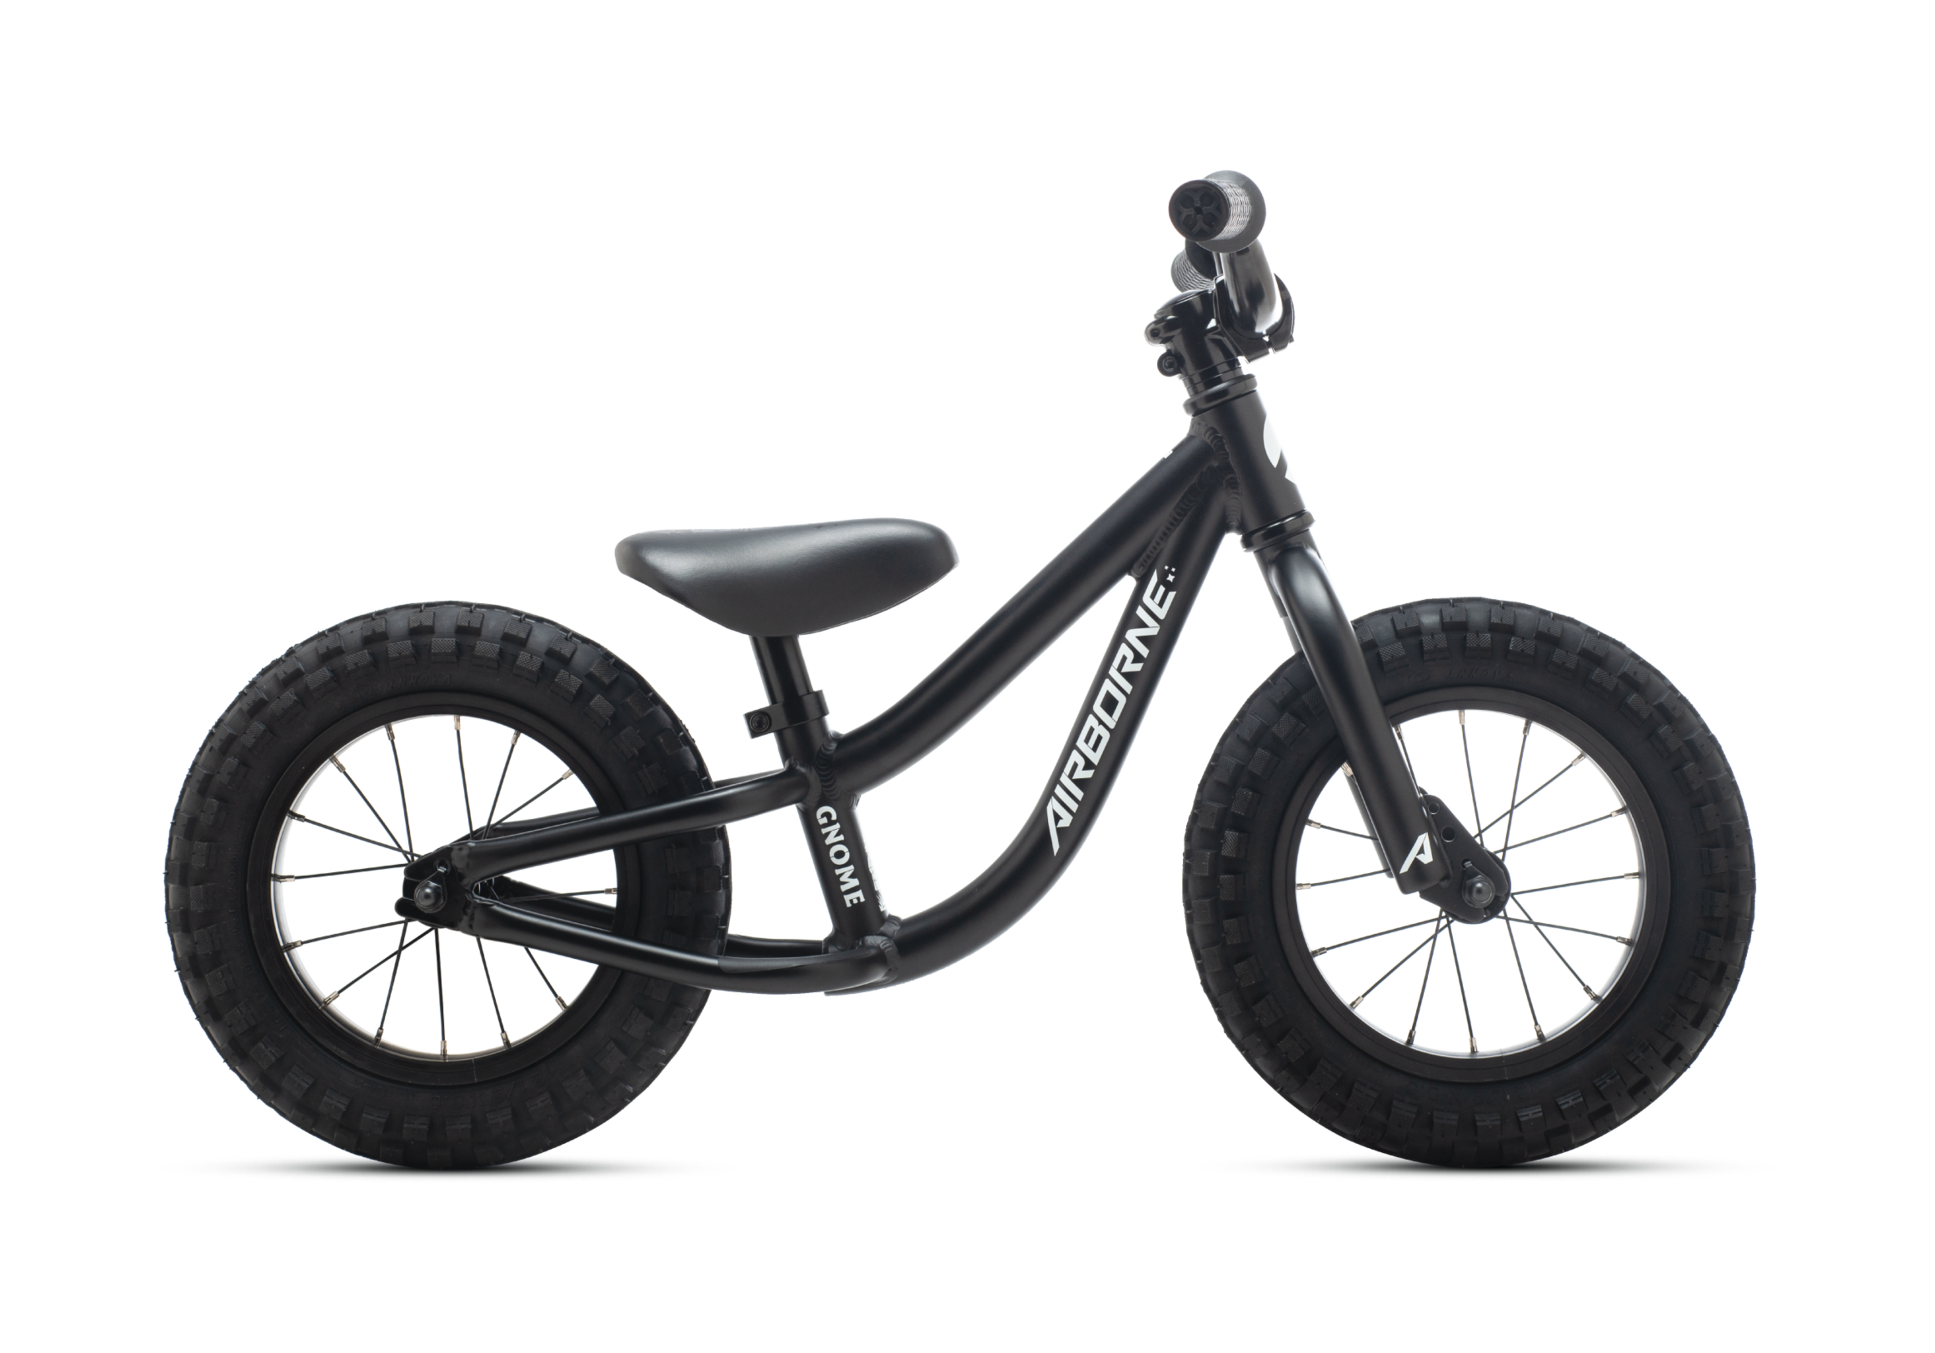 Airborne Gnome balance bike may be small, but 3" wide plus tires offer big grip